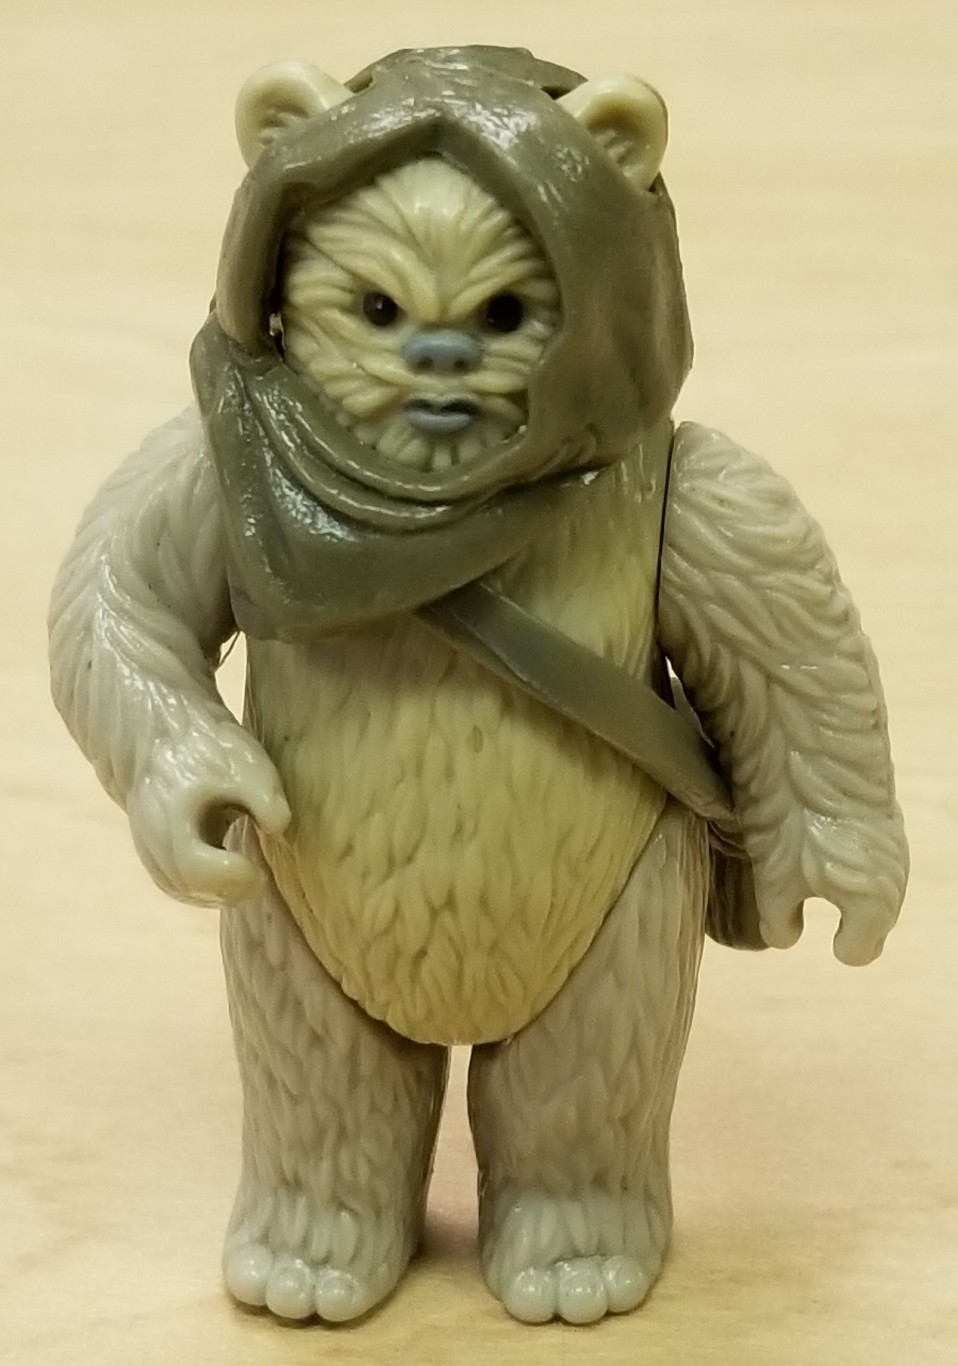 High Quality Low Cost vintage star wars ewok. New things that make life ...